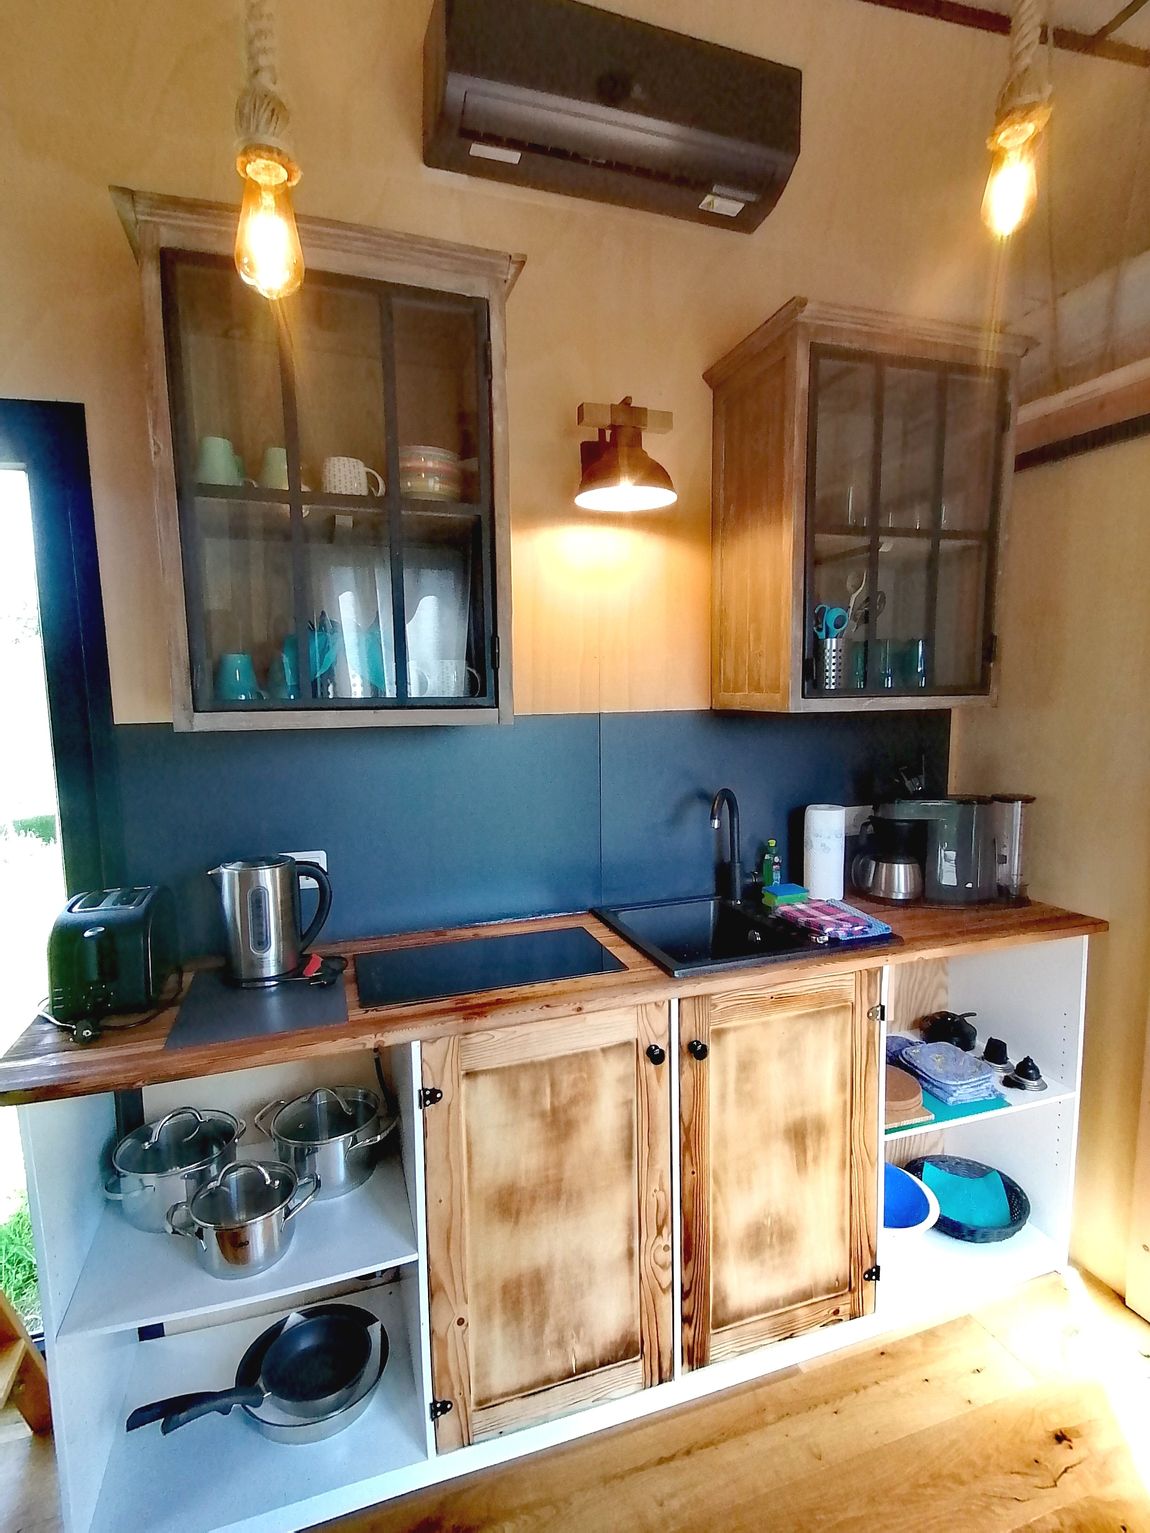 Country vacation in a tiny house on the lake district